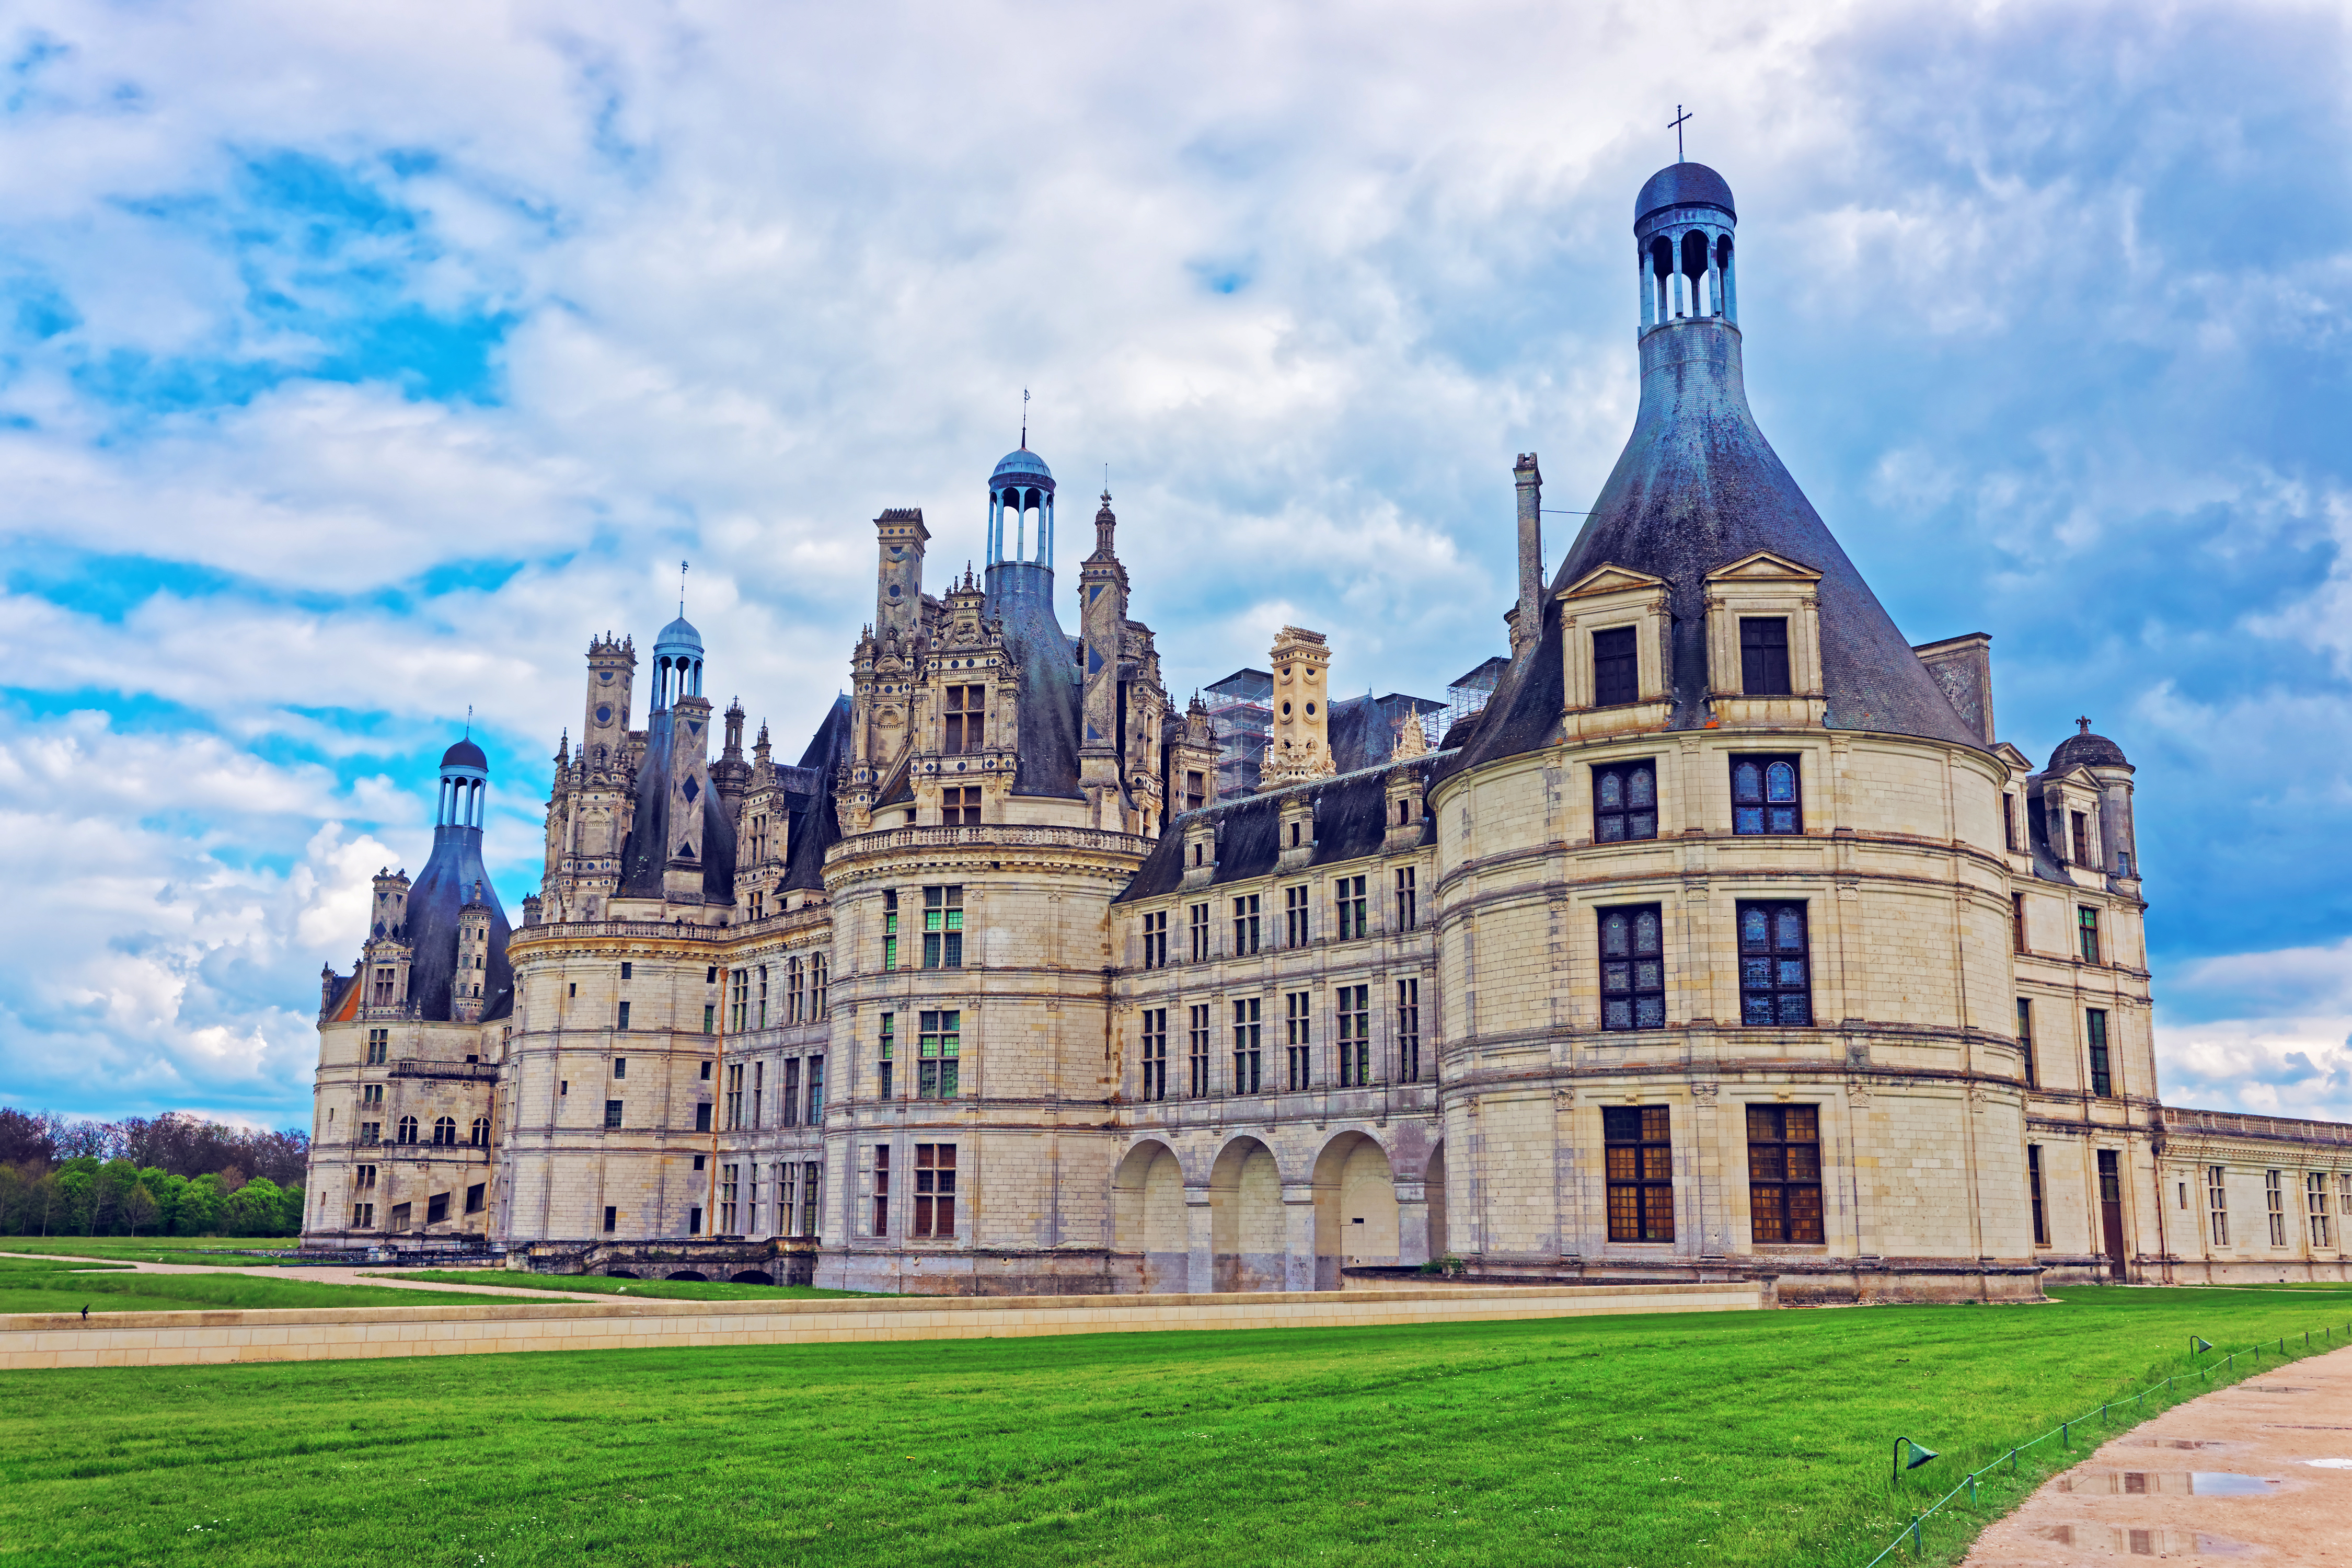 Chateau de Chambord palace in Loire valley France